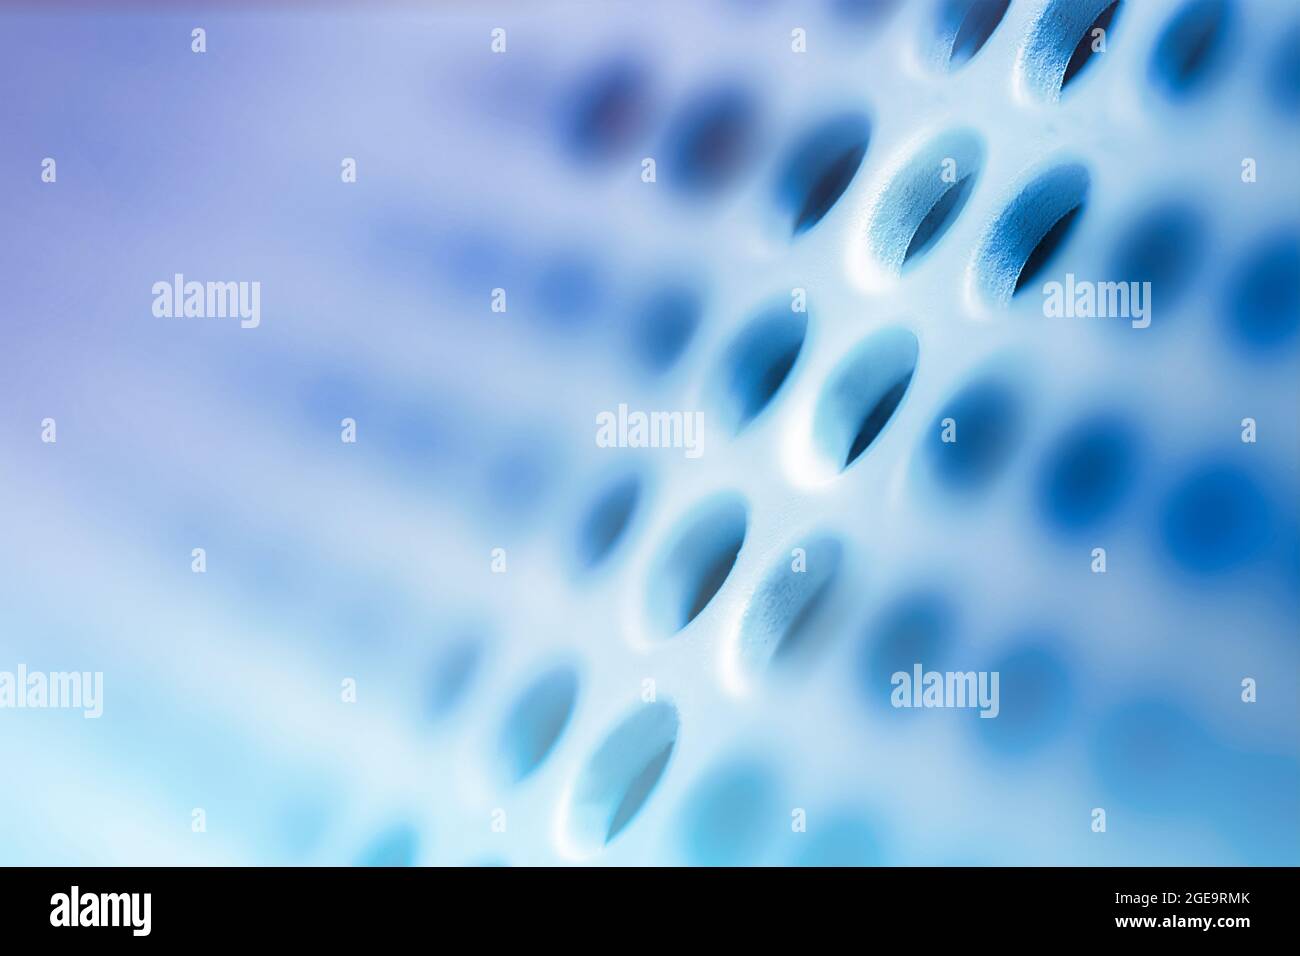 Abstract blue background on the theme of modern technology, communication, internet. Macro photography. Stock Photo